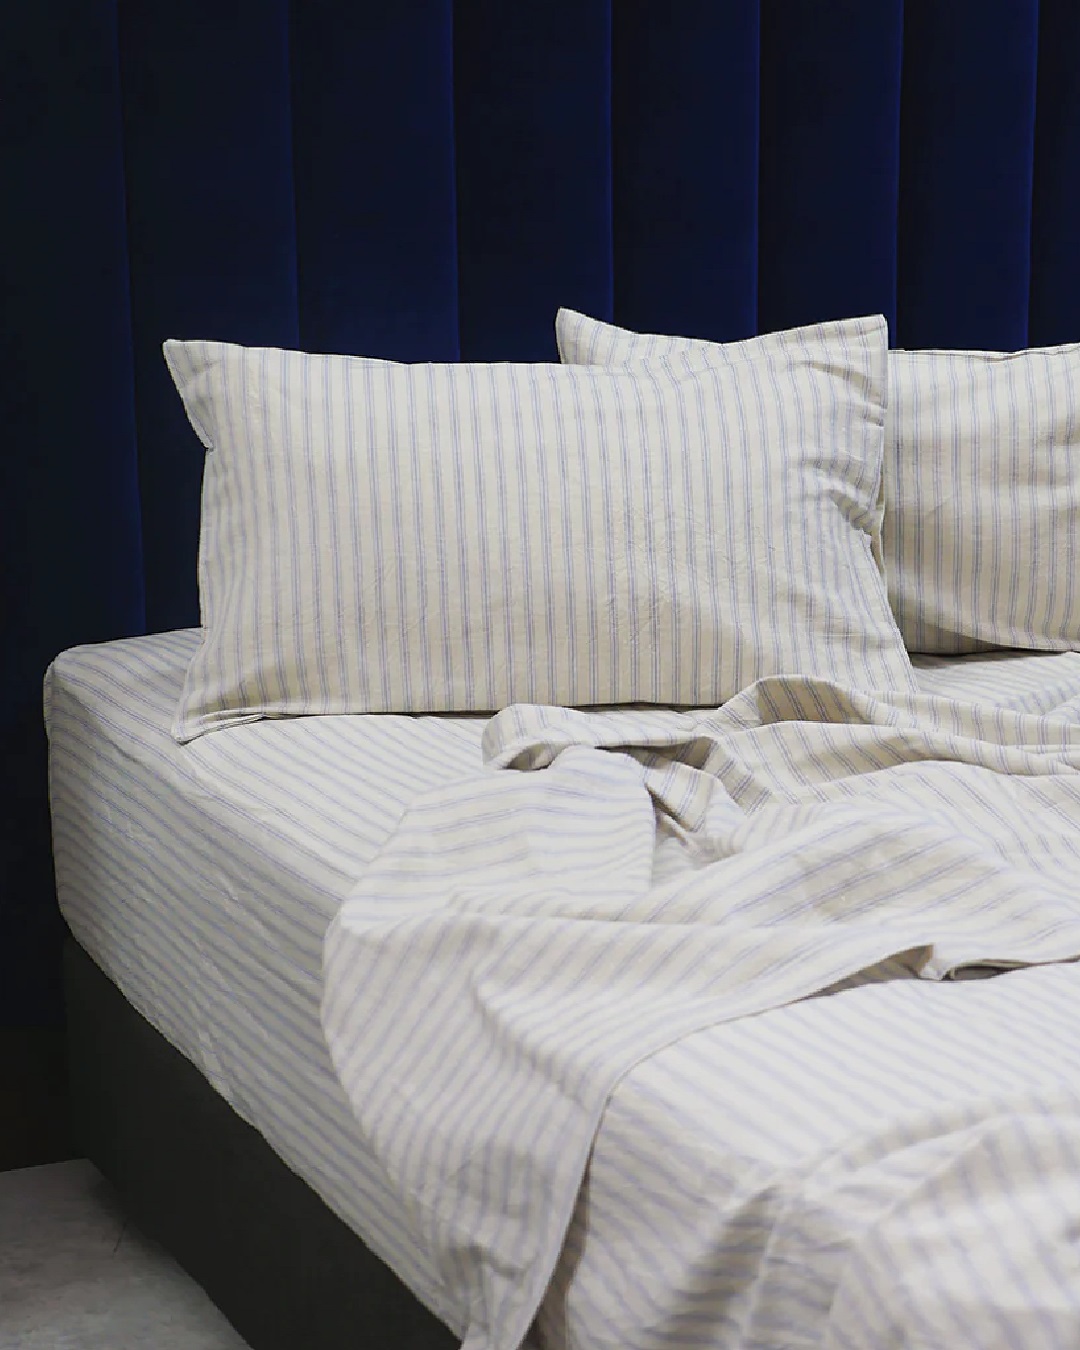 Striped blue and white sheets on bed with pillows